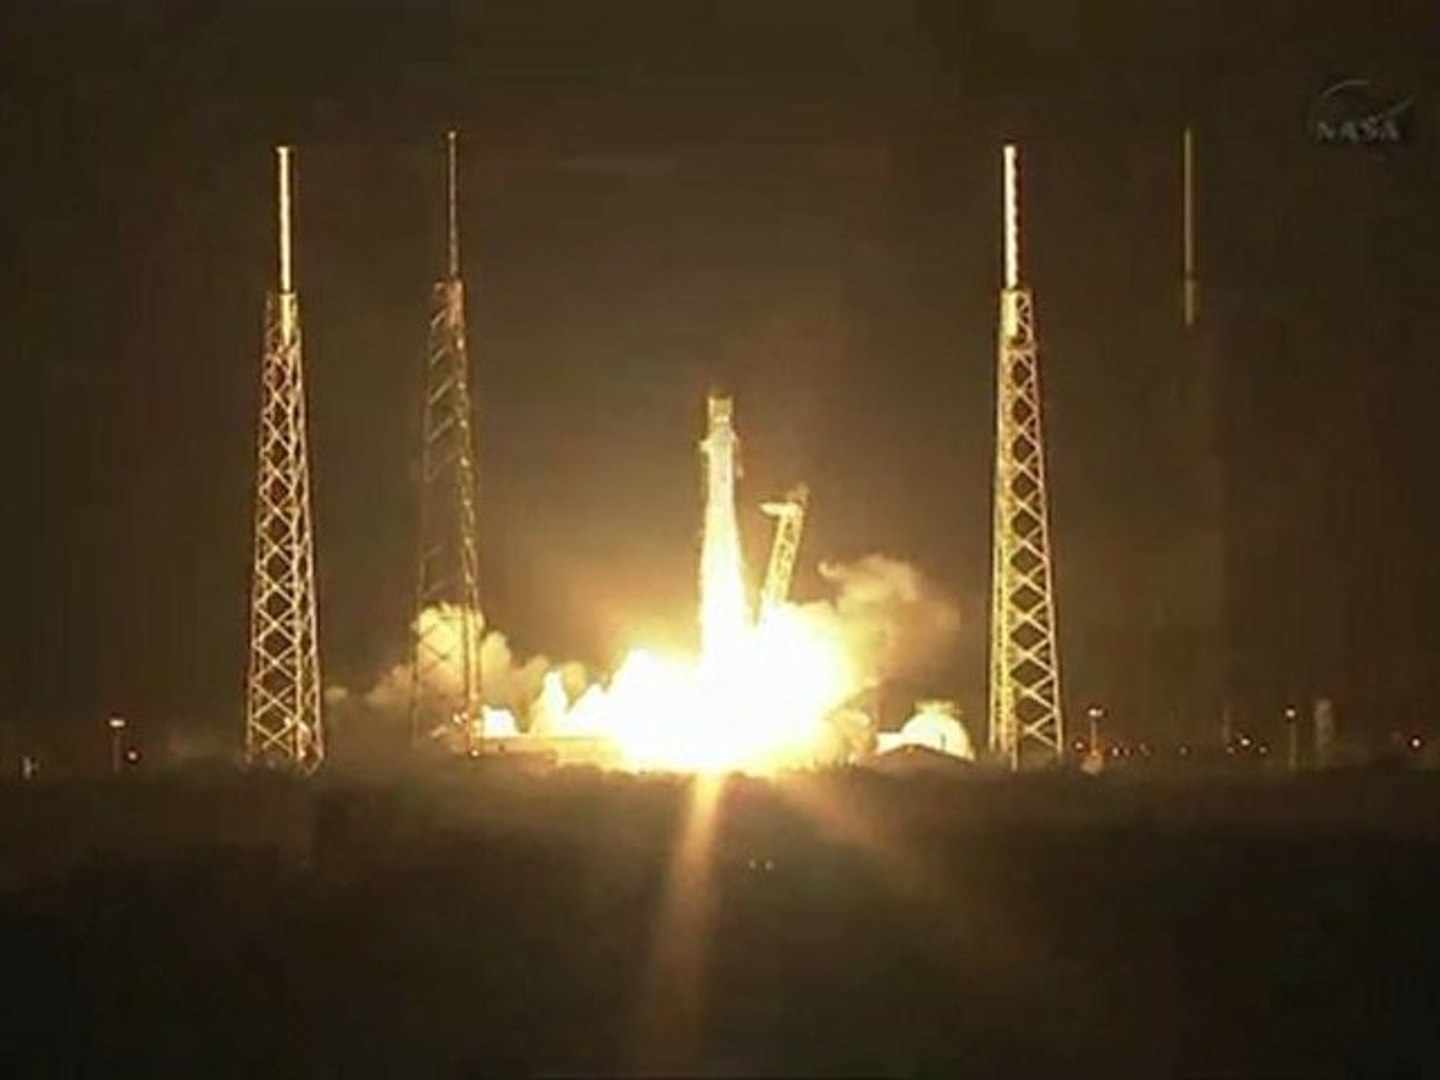 [SpaceX] Launch of SpaceX Dragon On CRS-1 Mission